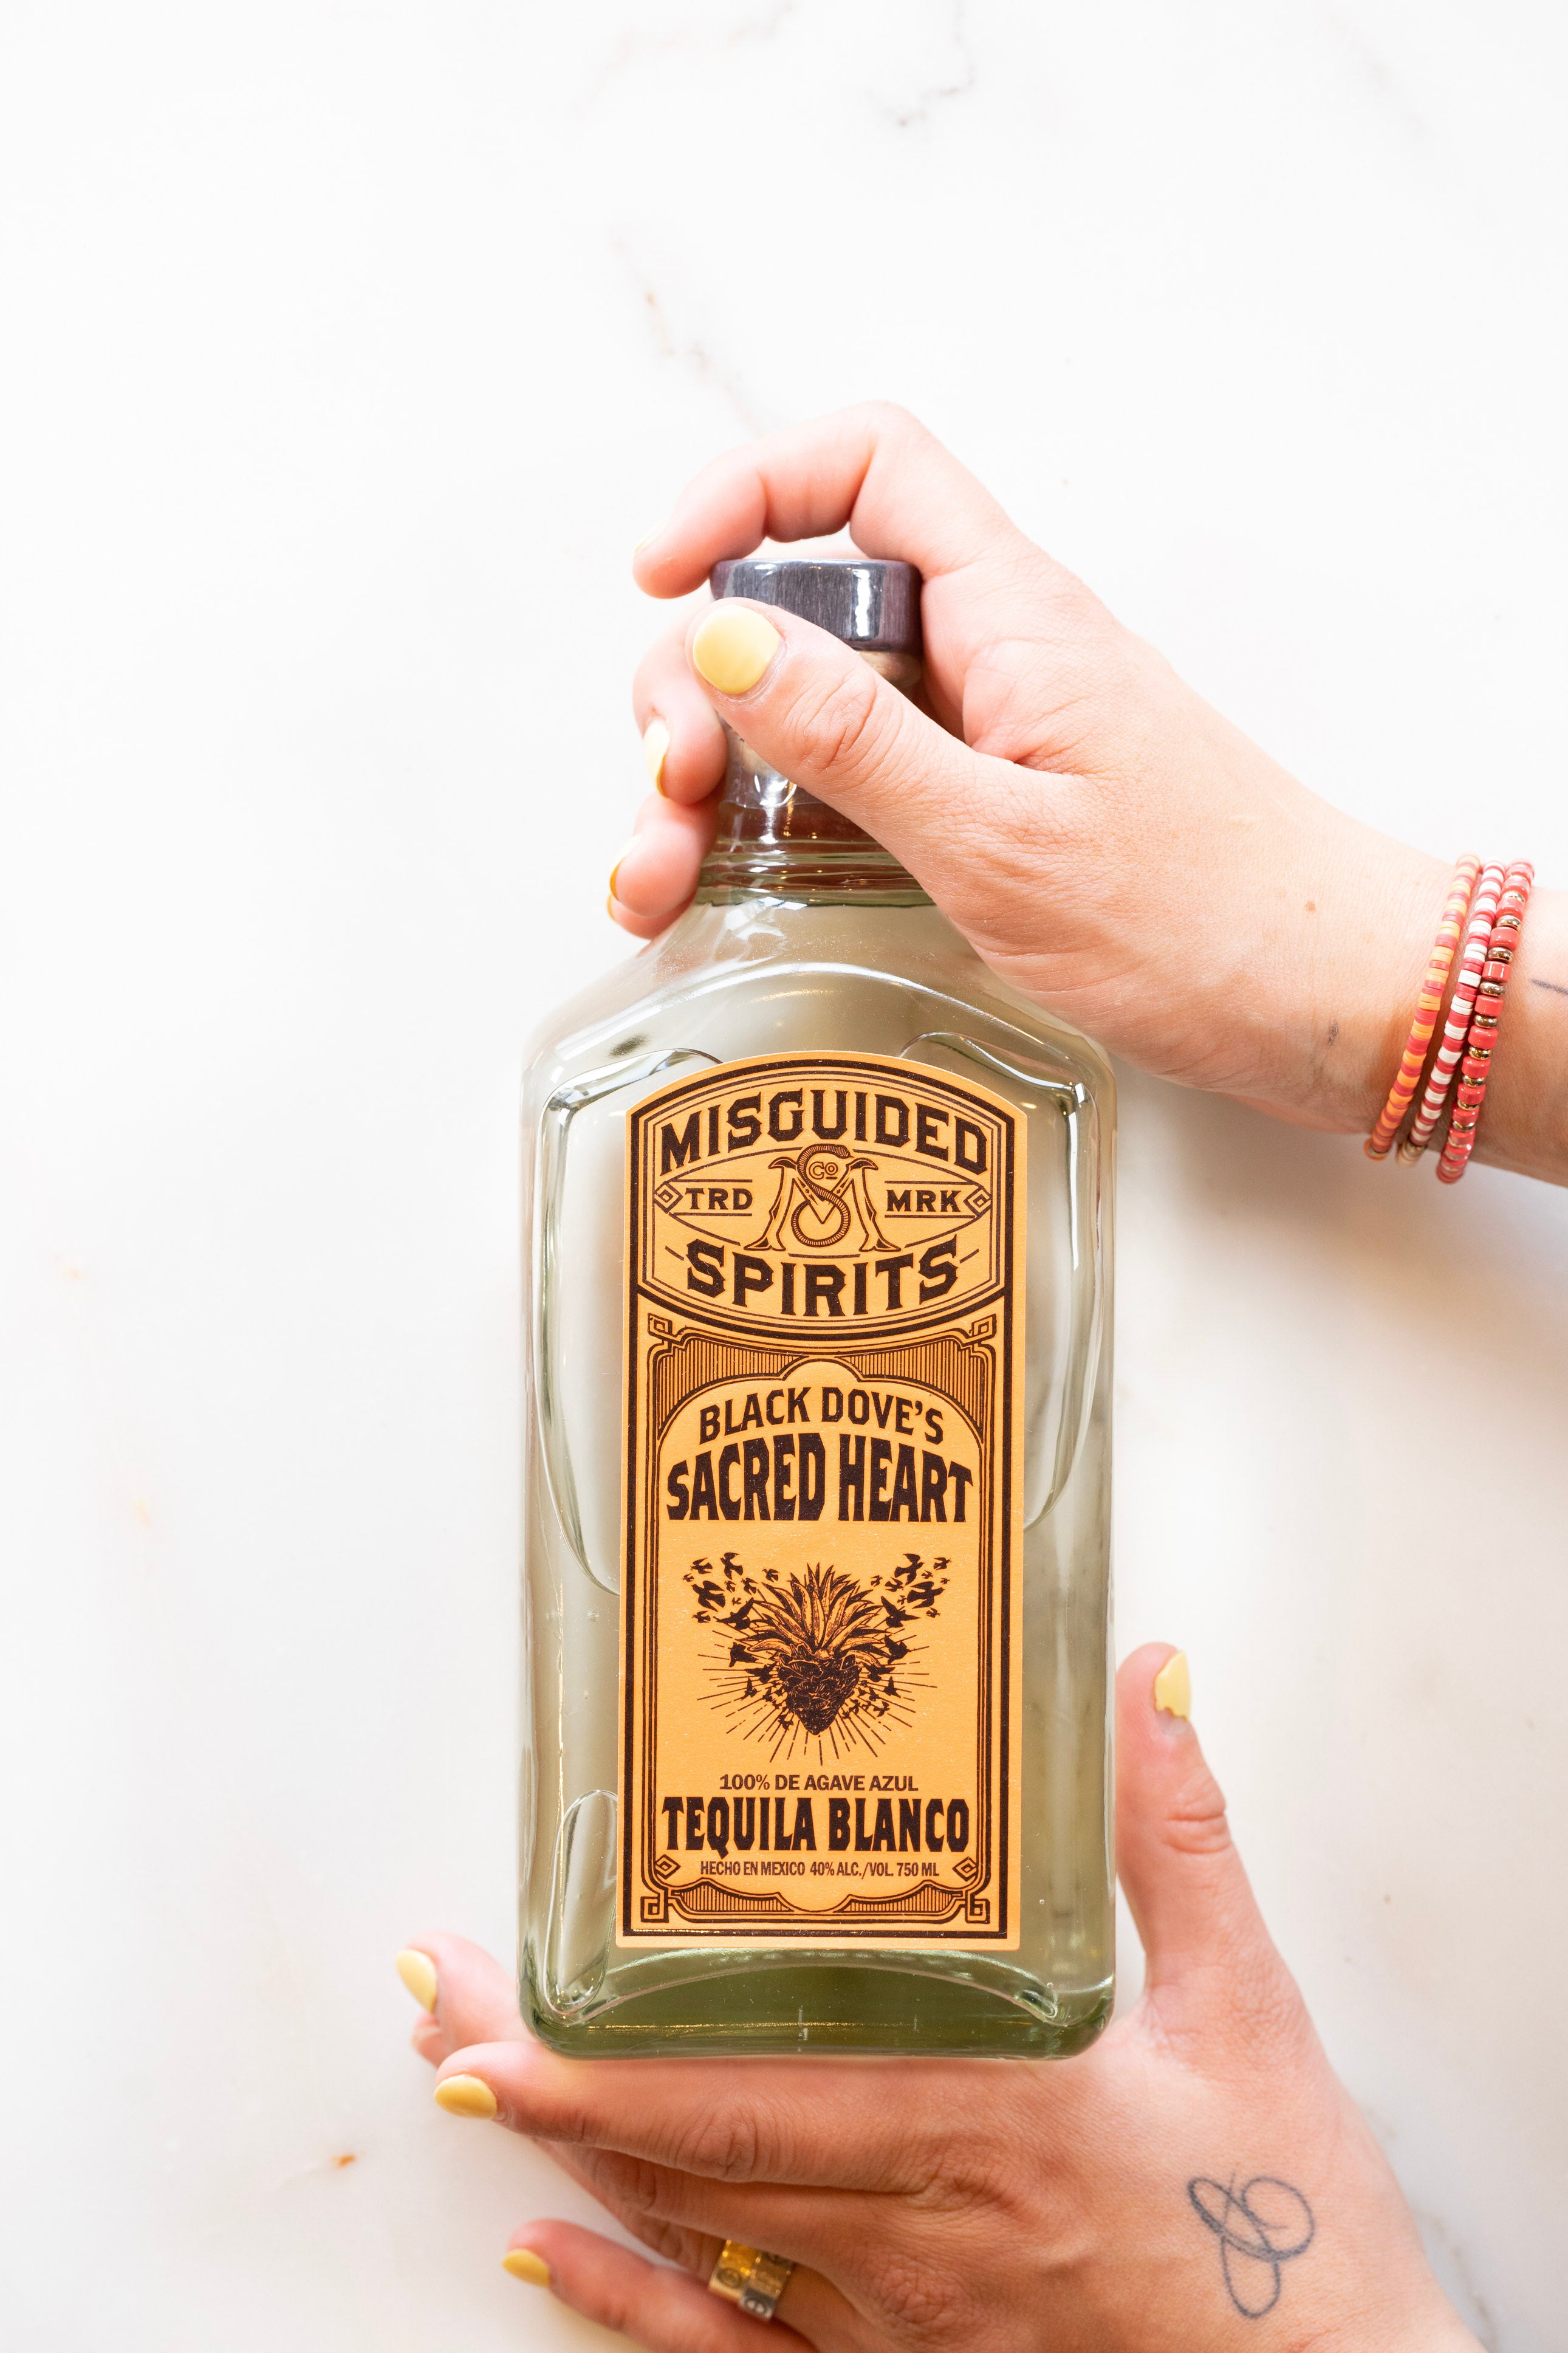 Misguided Spirits Black Dove's Sacred Heart Tequila Blanco